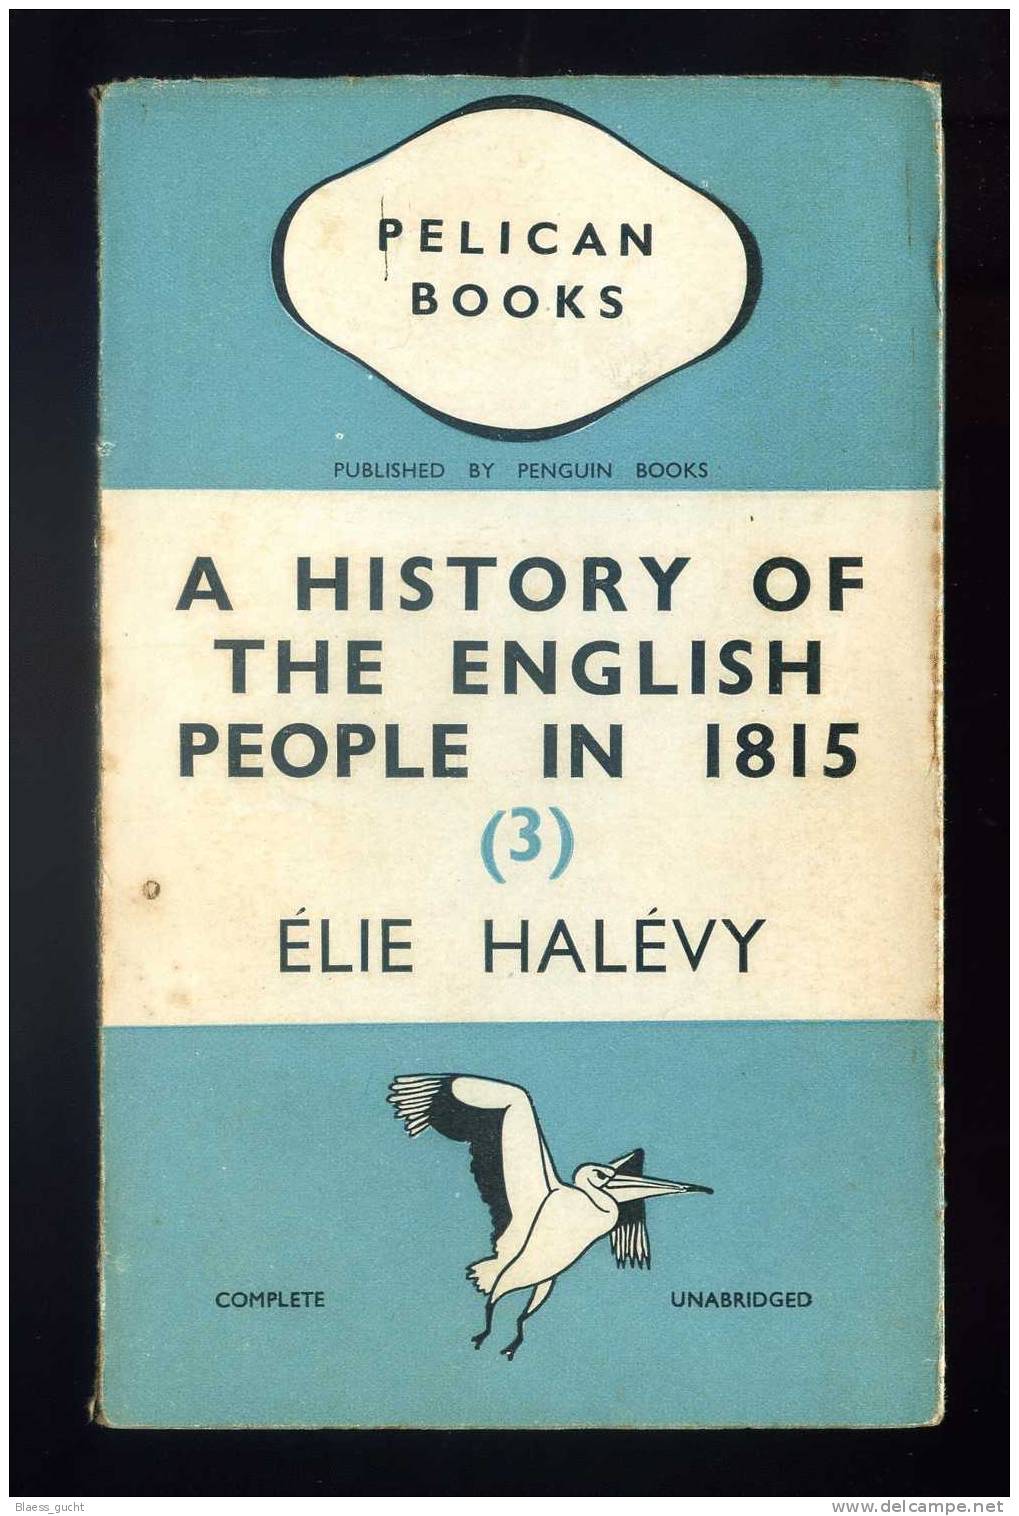 ELIE HALEVY  A HISTORY OF THE ENGLISH PEOPLE IN 1815  PELICAN BOOKS 1937 - Europa